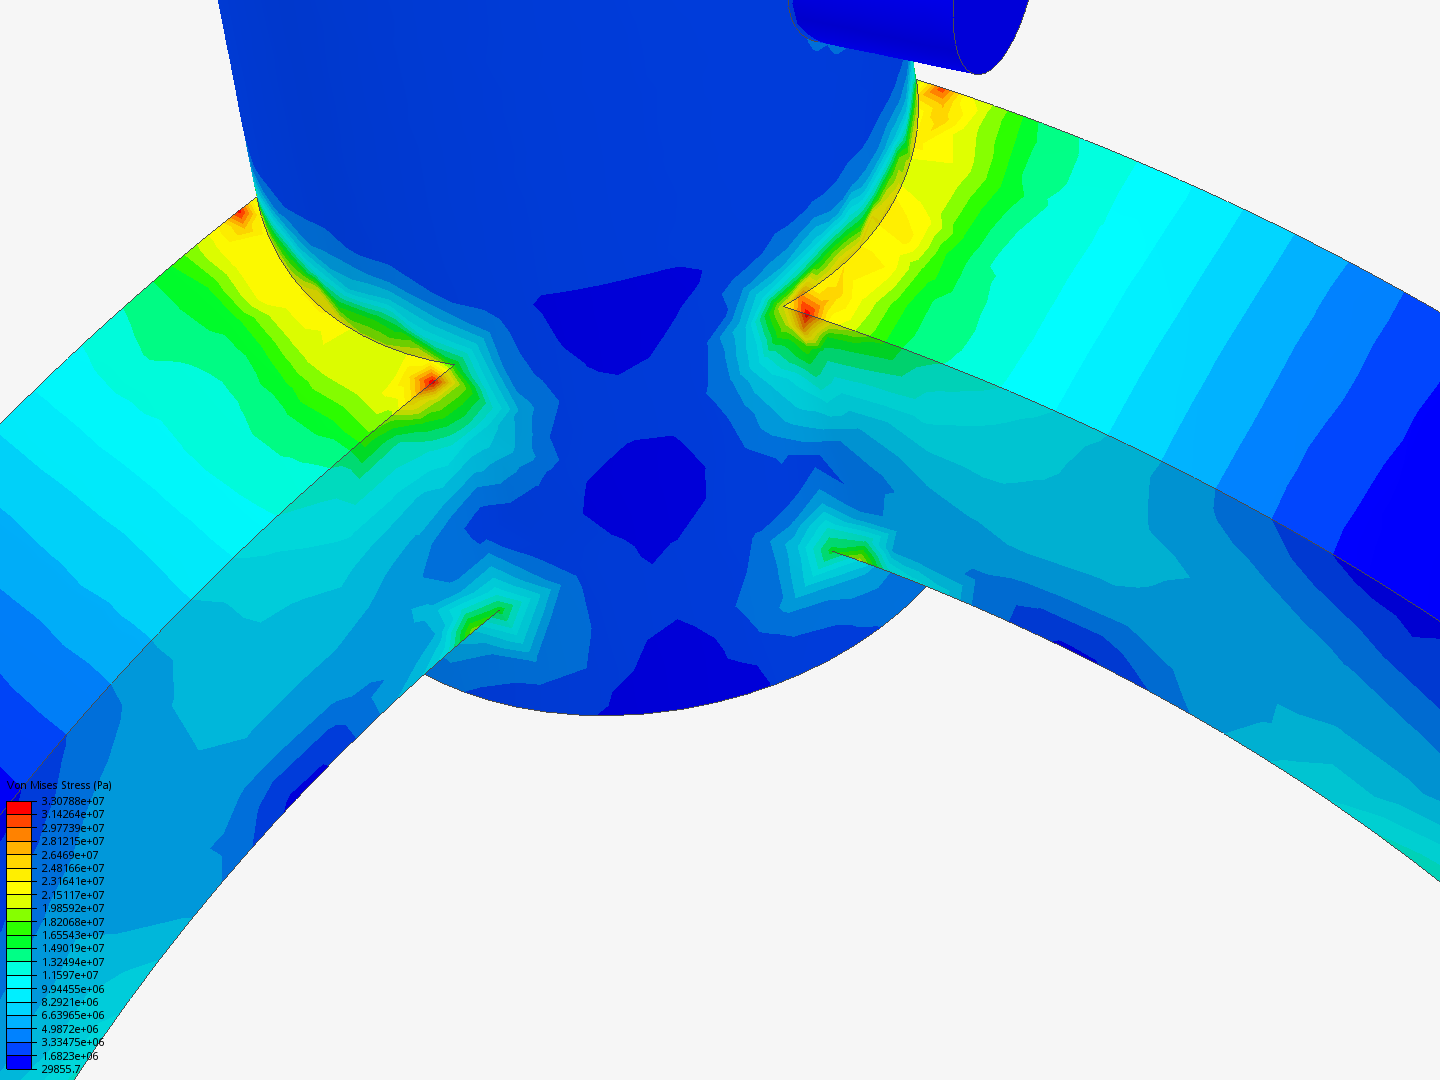 ansys image